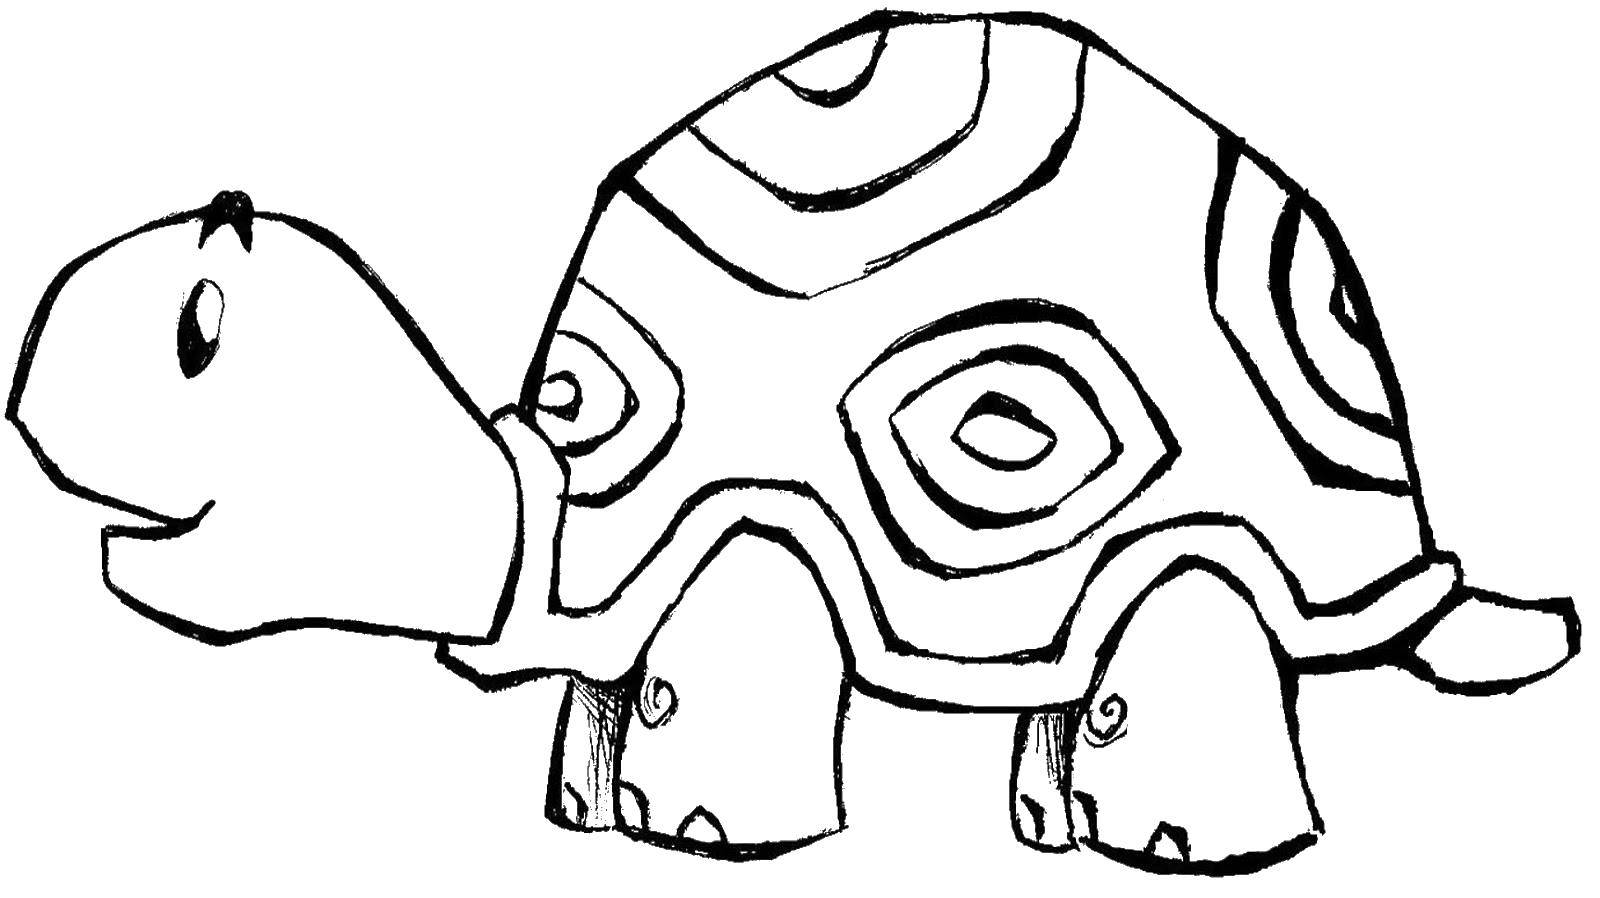 Coloring Turtle. Category Coloring pages for kids. Tags:  turtle, shell.